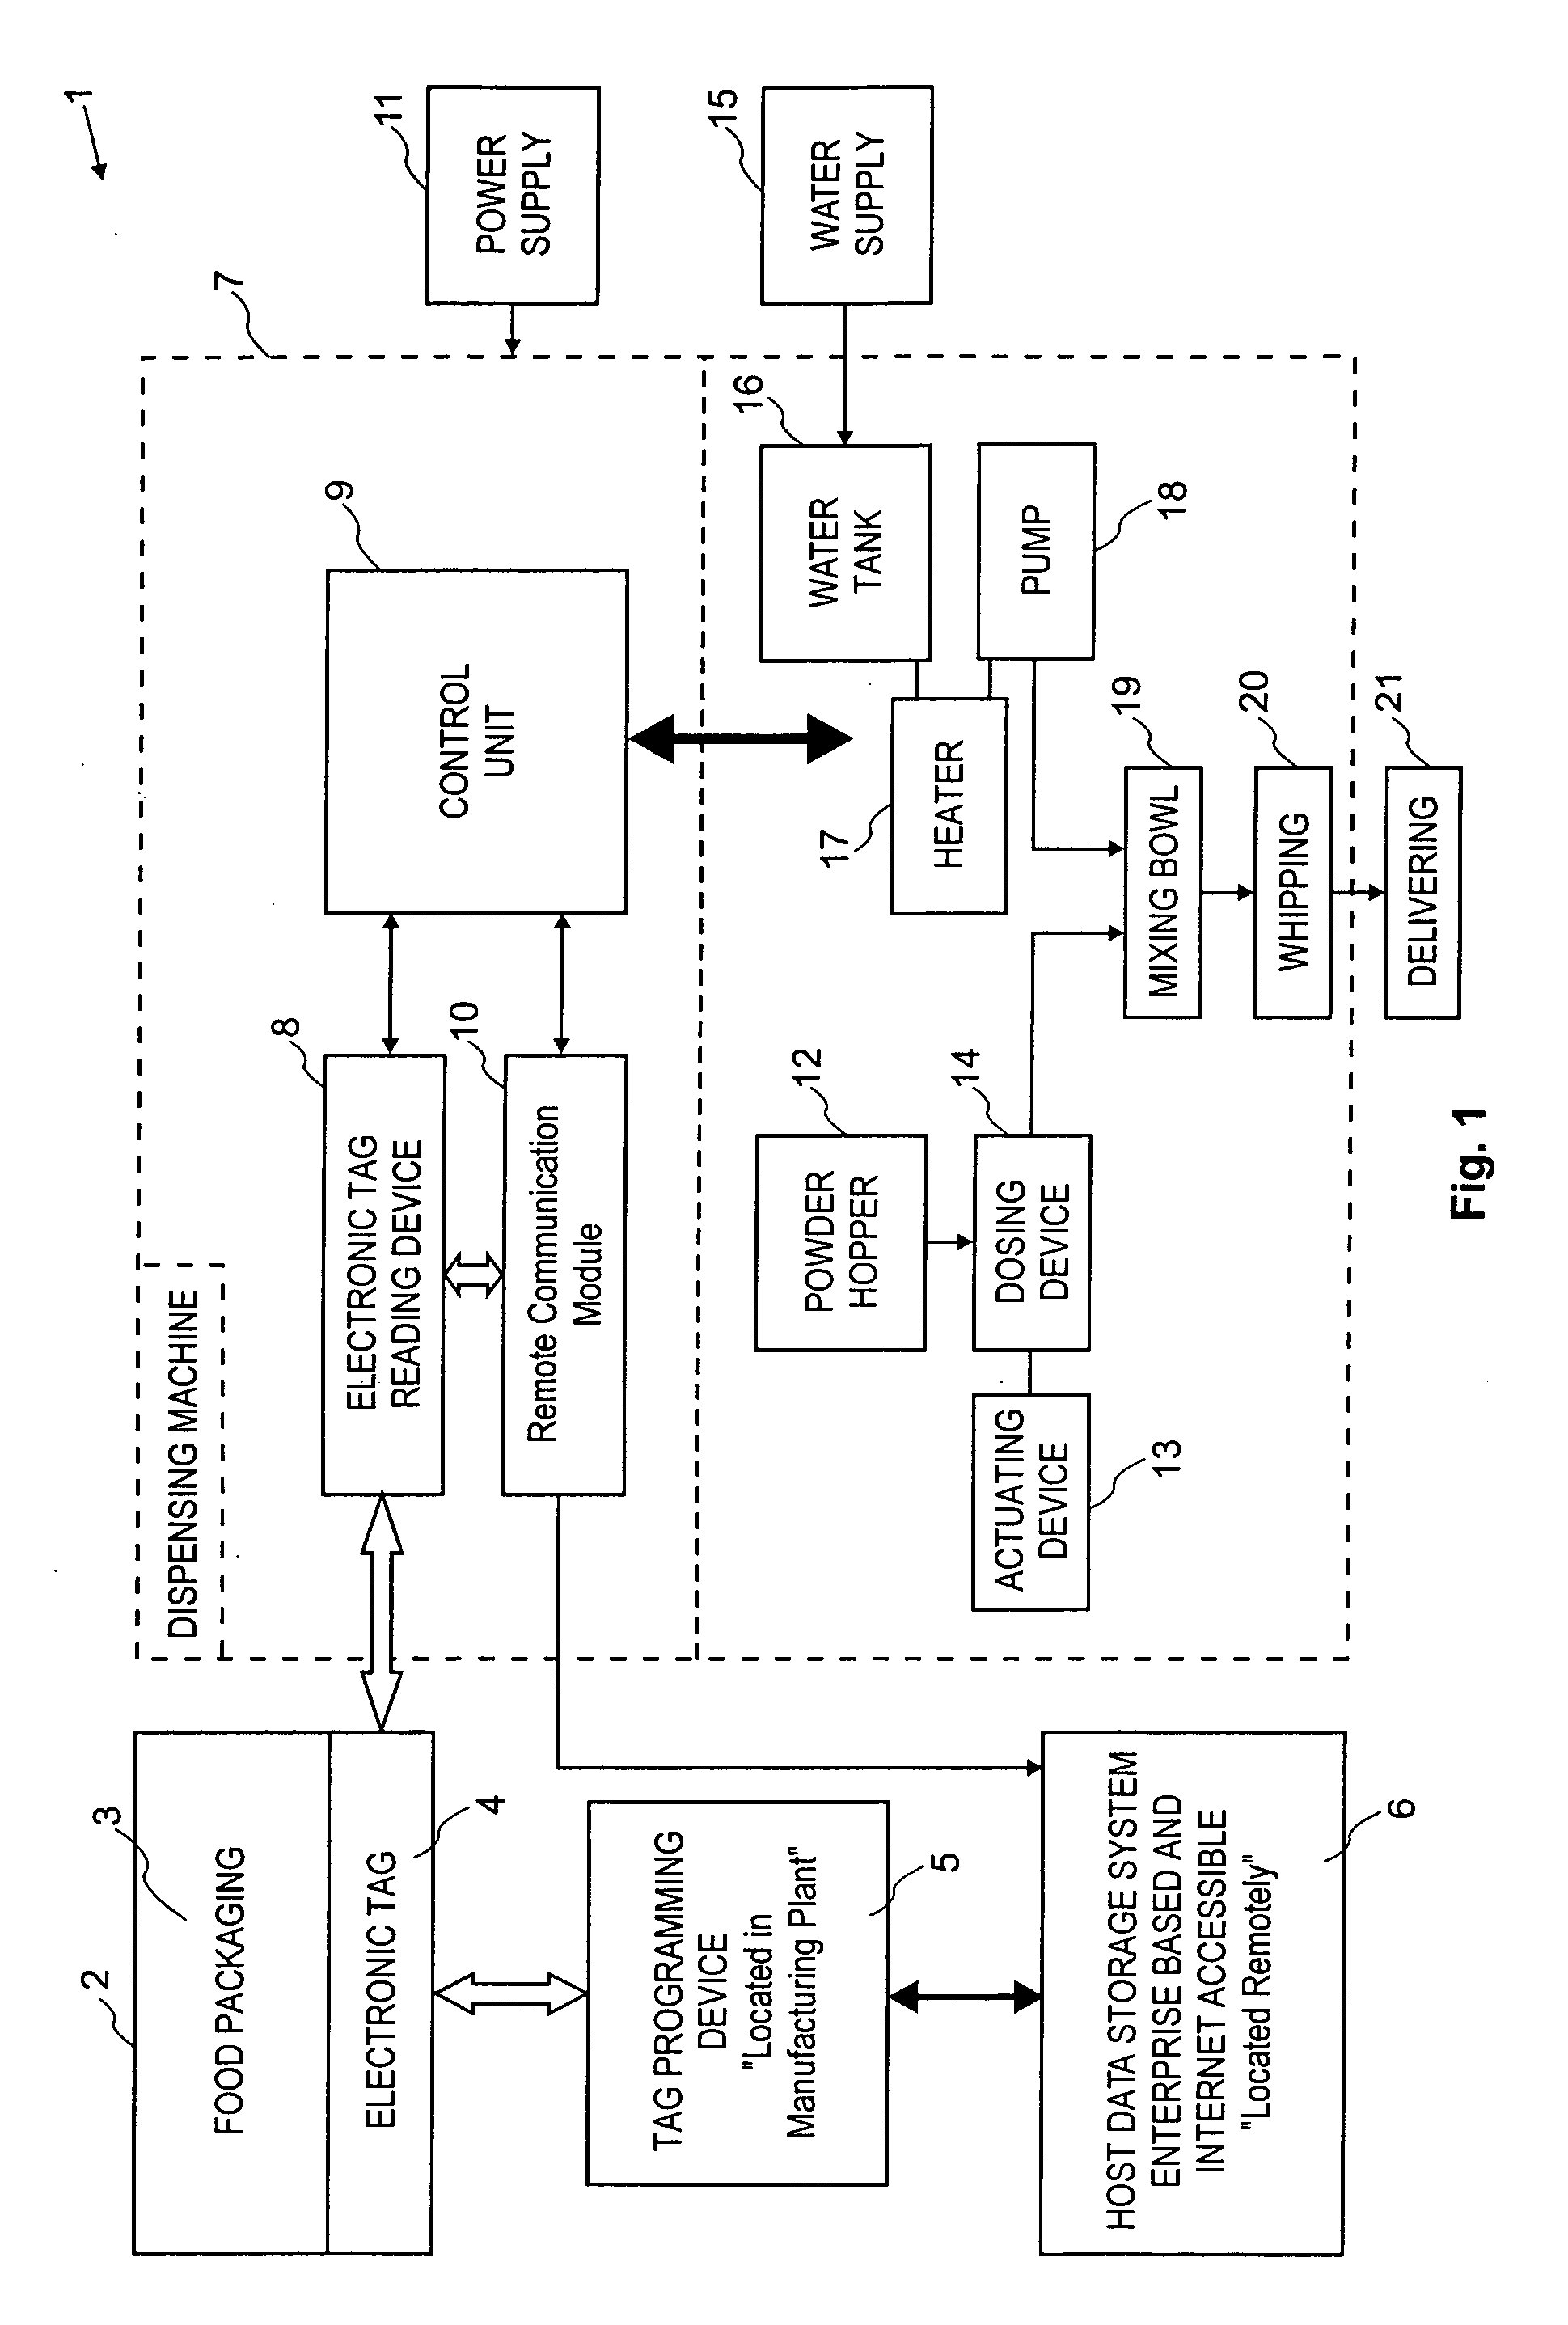 Method and system of setting and/or controlling of a food product dispensing machine using a tag-type communication device